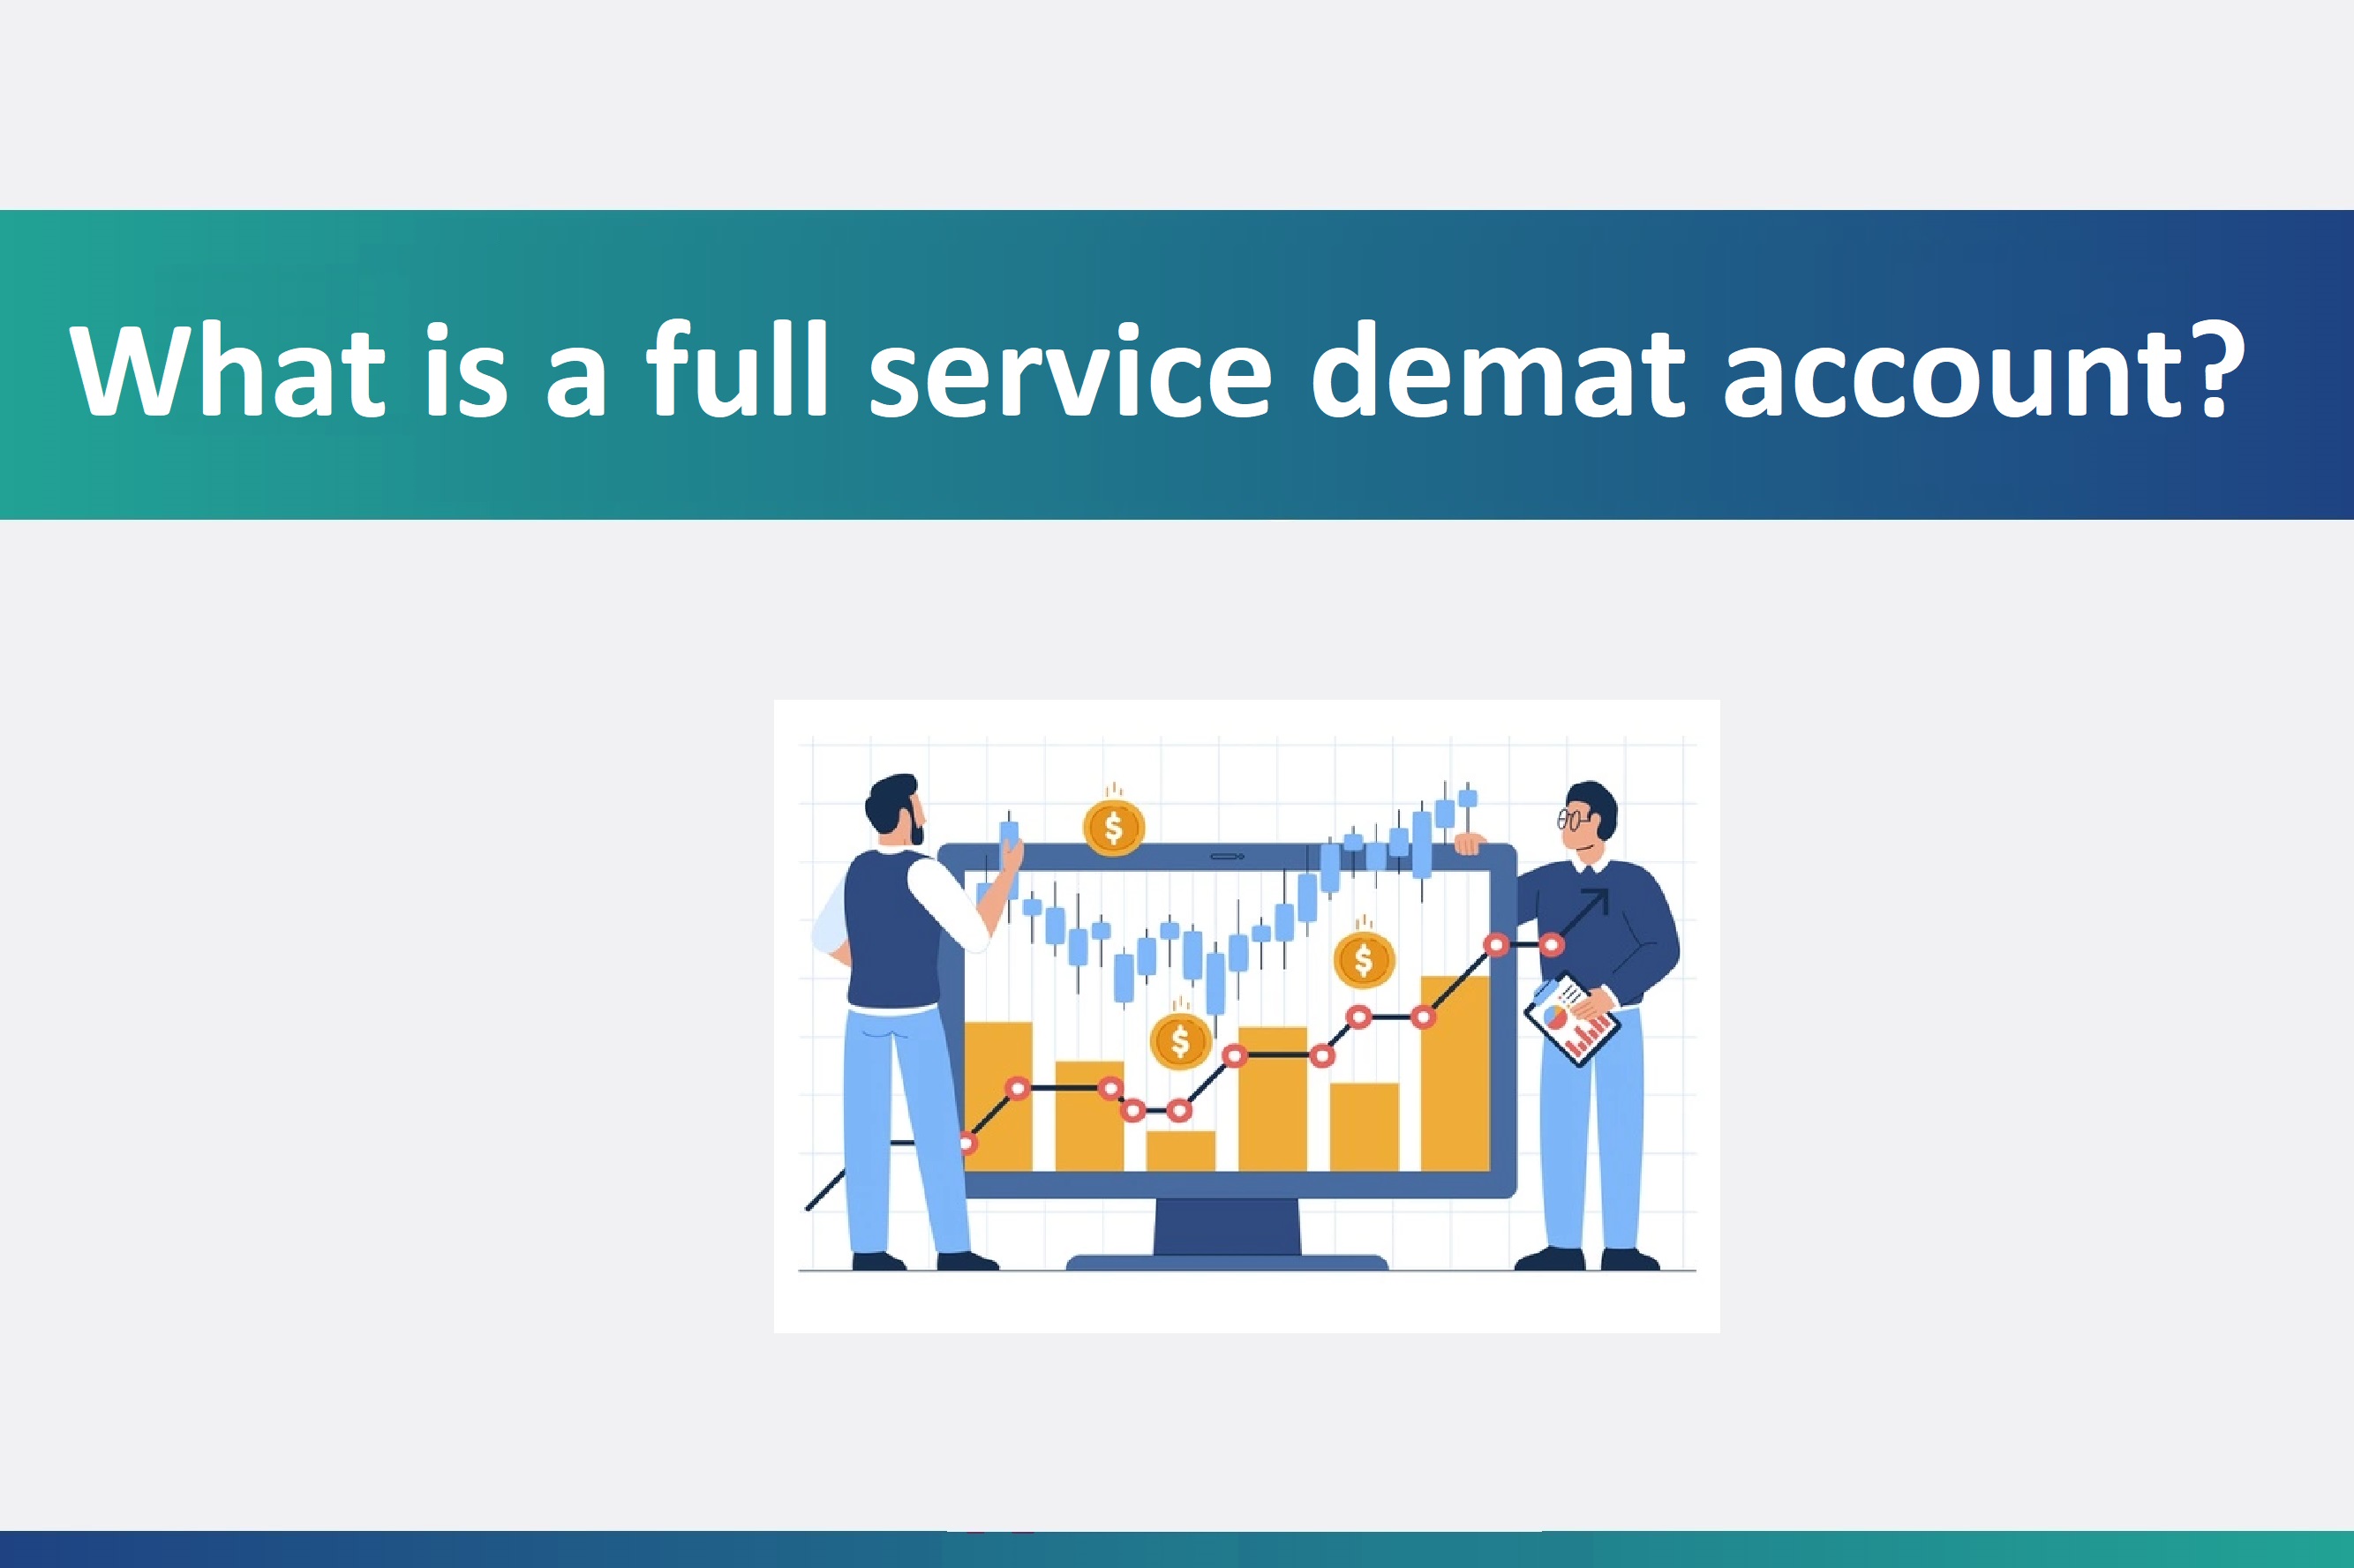 What is a full service demat account?